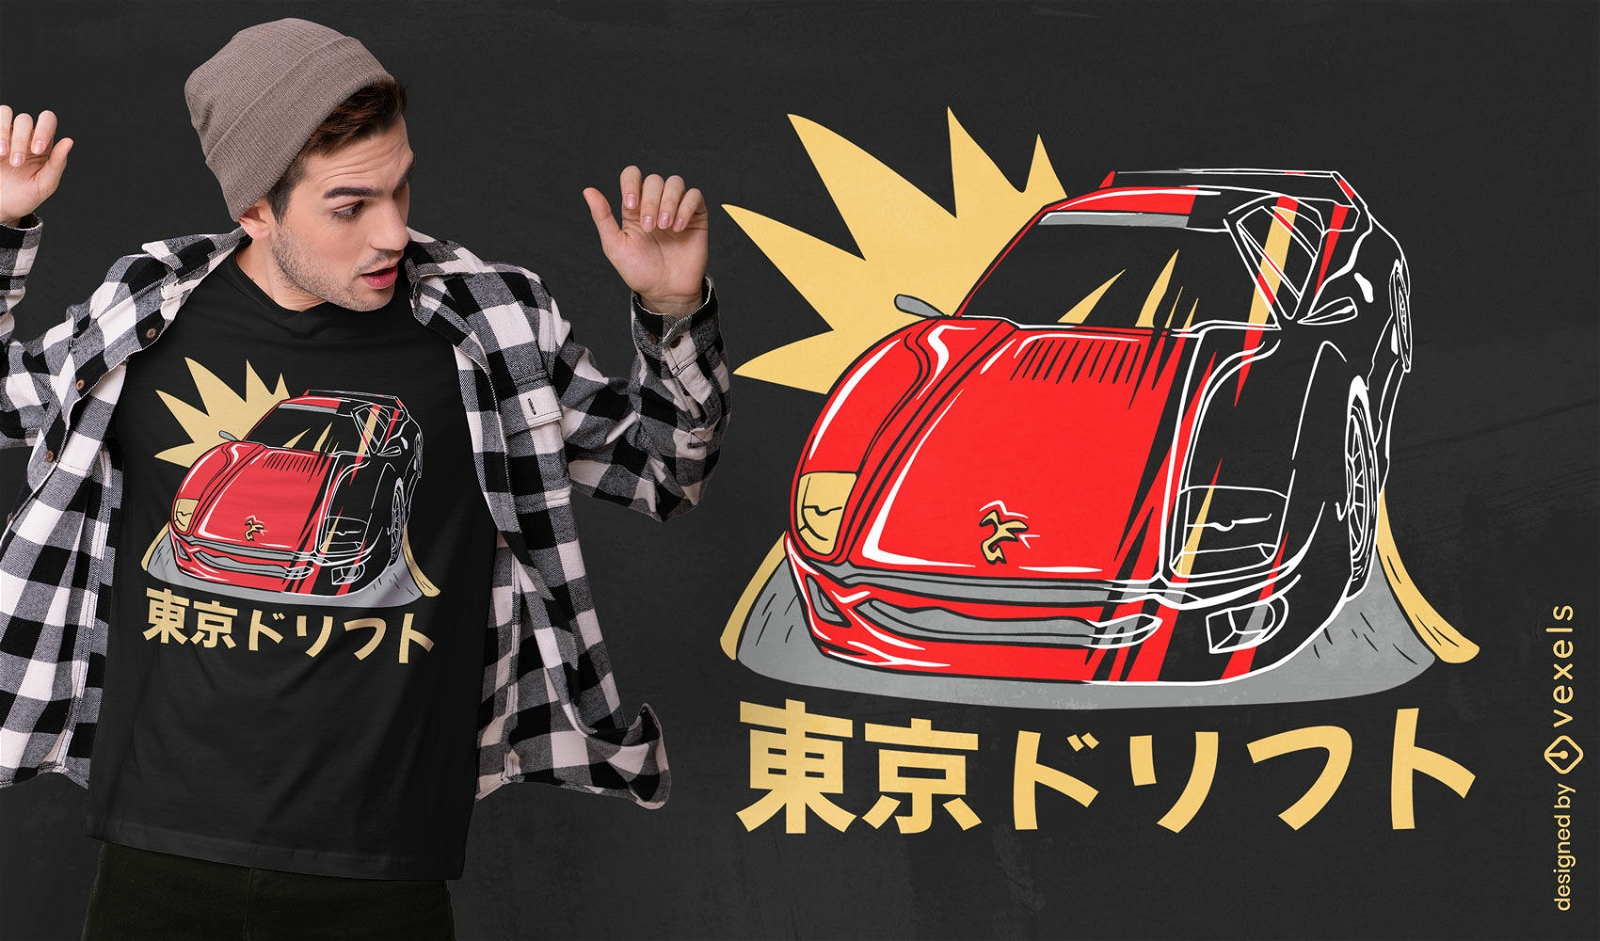 Japanese sports car and text t-shirt design